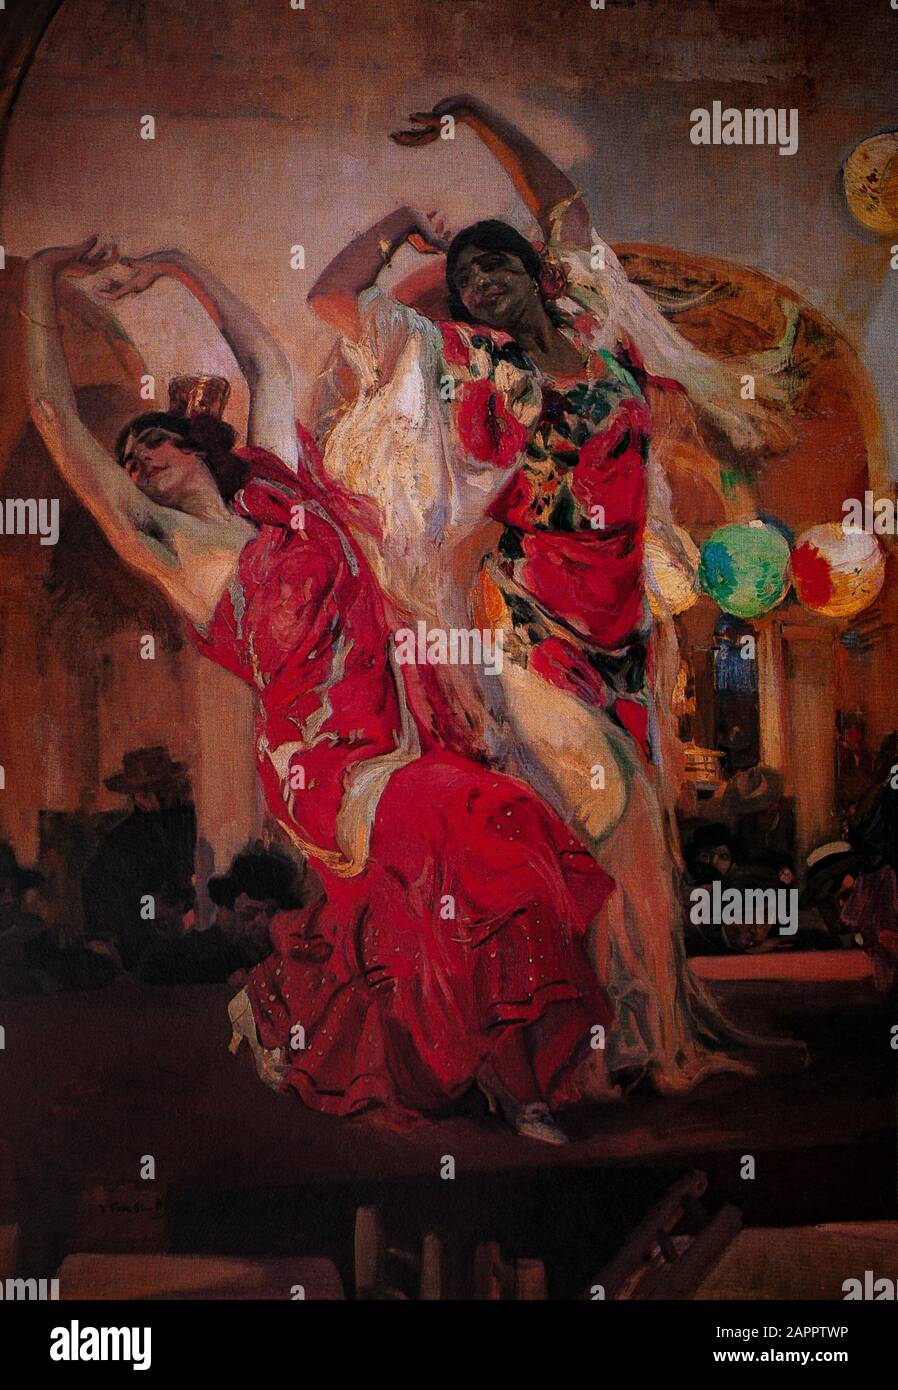 Flamenco dancers, an art form based on the various folkloric music traditions of southern Spain in the autonomous community of Andalusia. A detail from 'Baile en el Cafe, Novedades de Seville 1914' by Joaquín Sorolla y Bastida (1863-1923) was a Spanish painter who excelled in portraits, landscapes and monumental works of social and historical themes. Stock Photo